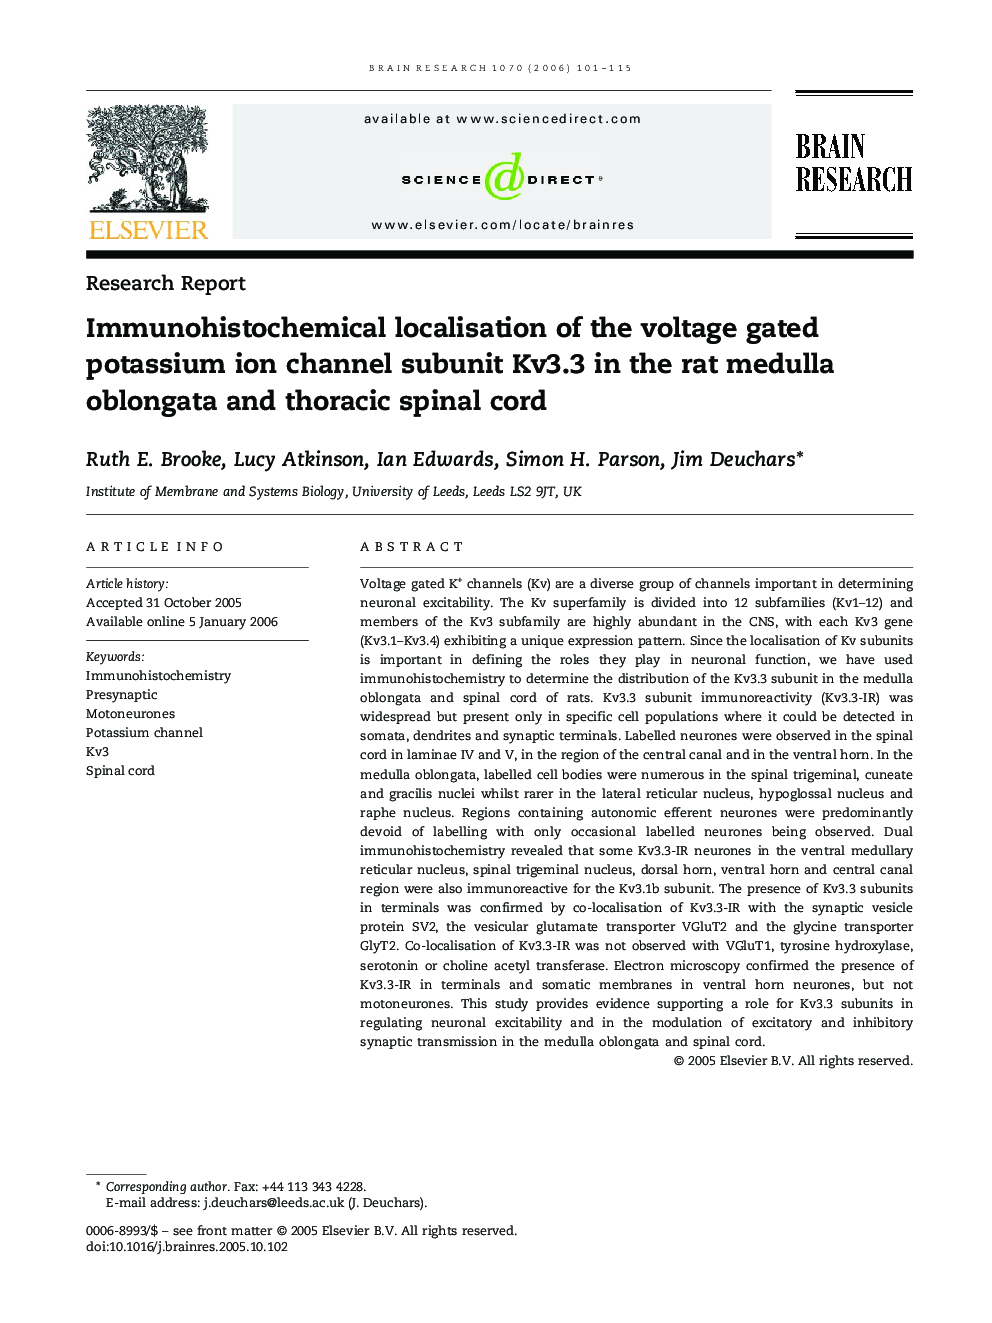 Immunohistochemical localisation of the voltage gated potassium ion channel subunit Kv3.3 in the rat medulla oblongata and thoracic spinal cord